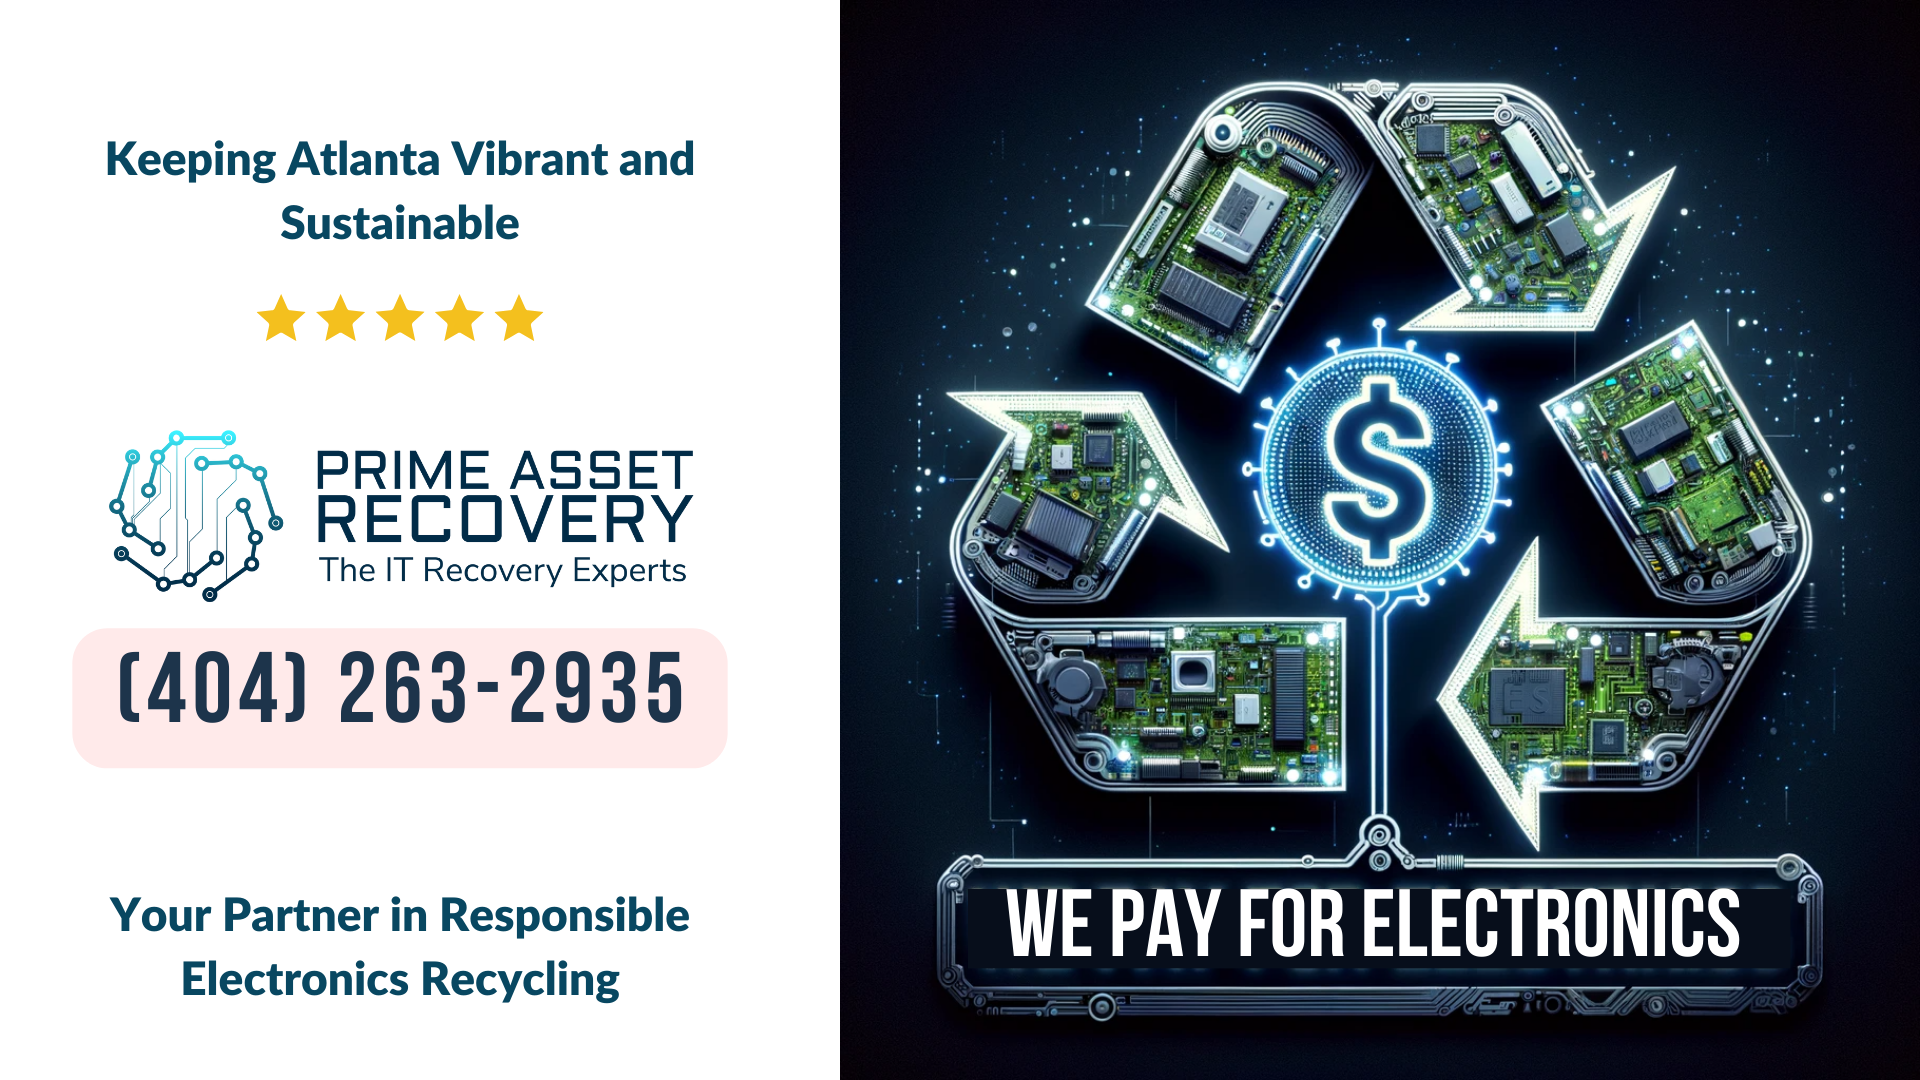 Electronics Recycling Atlanta - Prime Asset Recovery Your Partner in Responsible Electronics Recycling